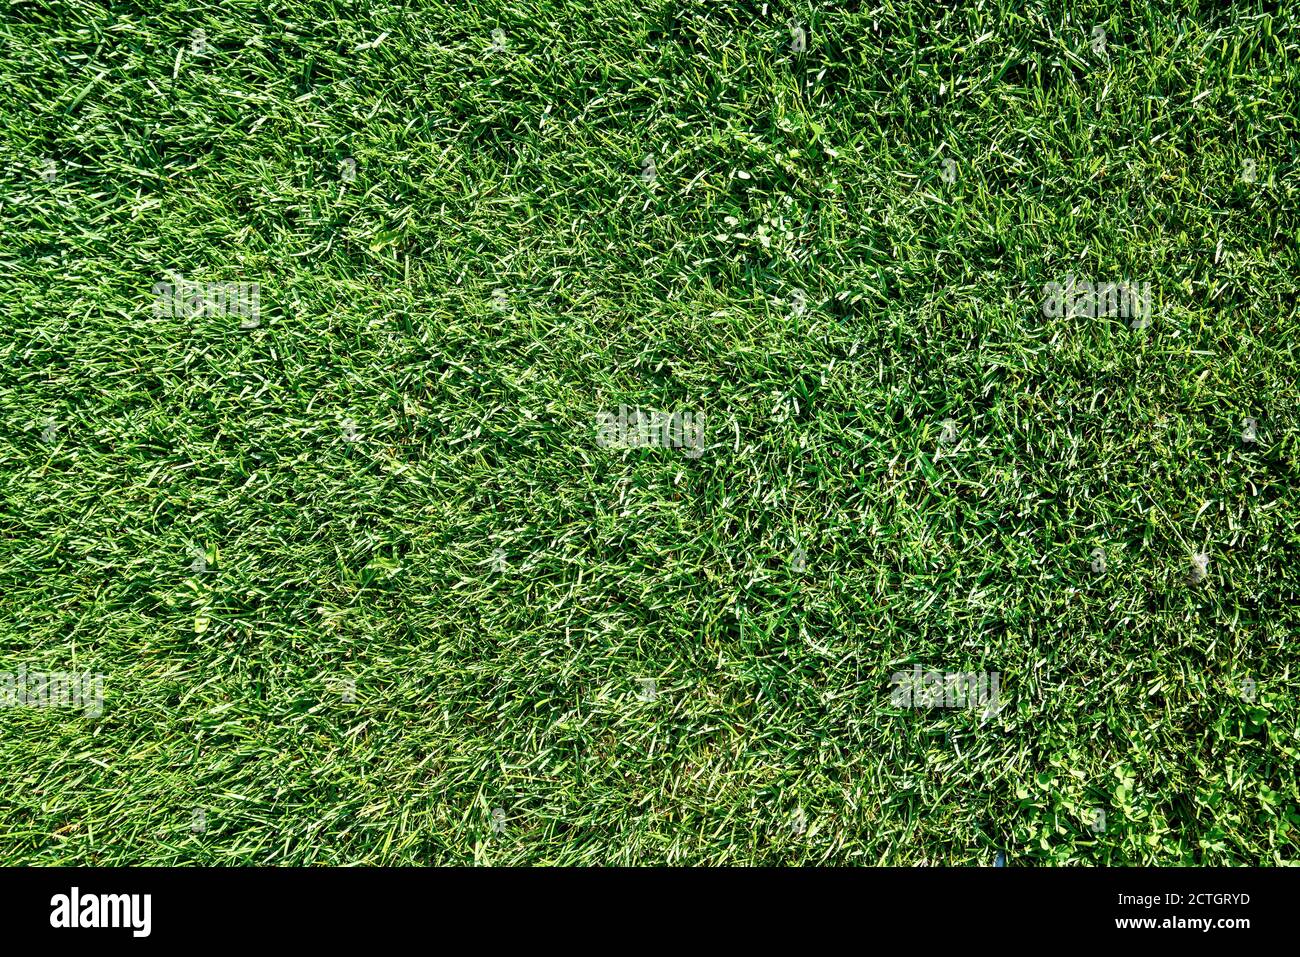 View of green grass or lawn of a play ground or field. High quality photo Stock Photo